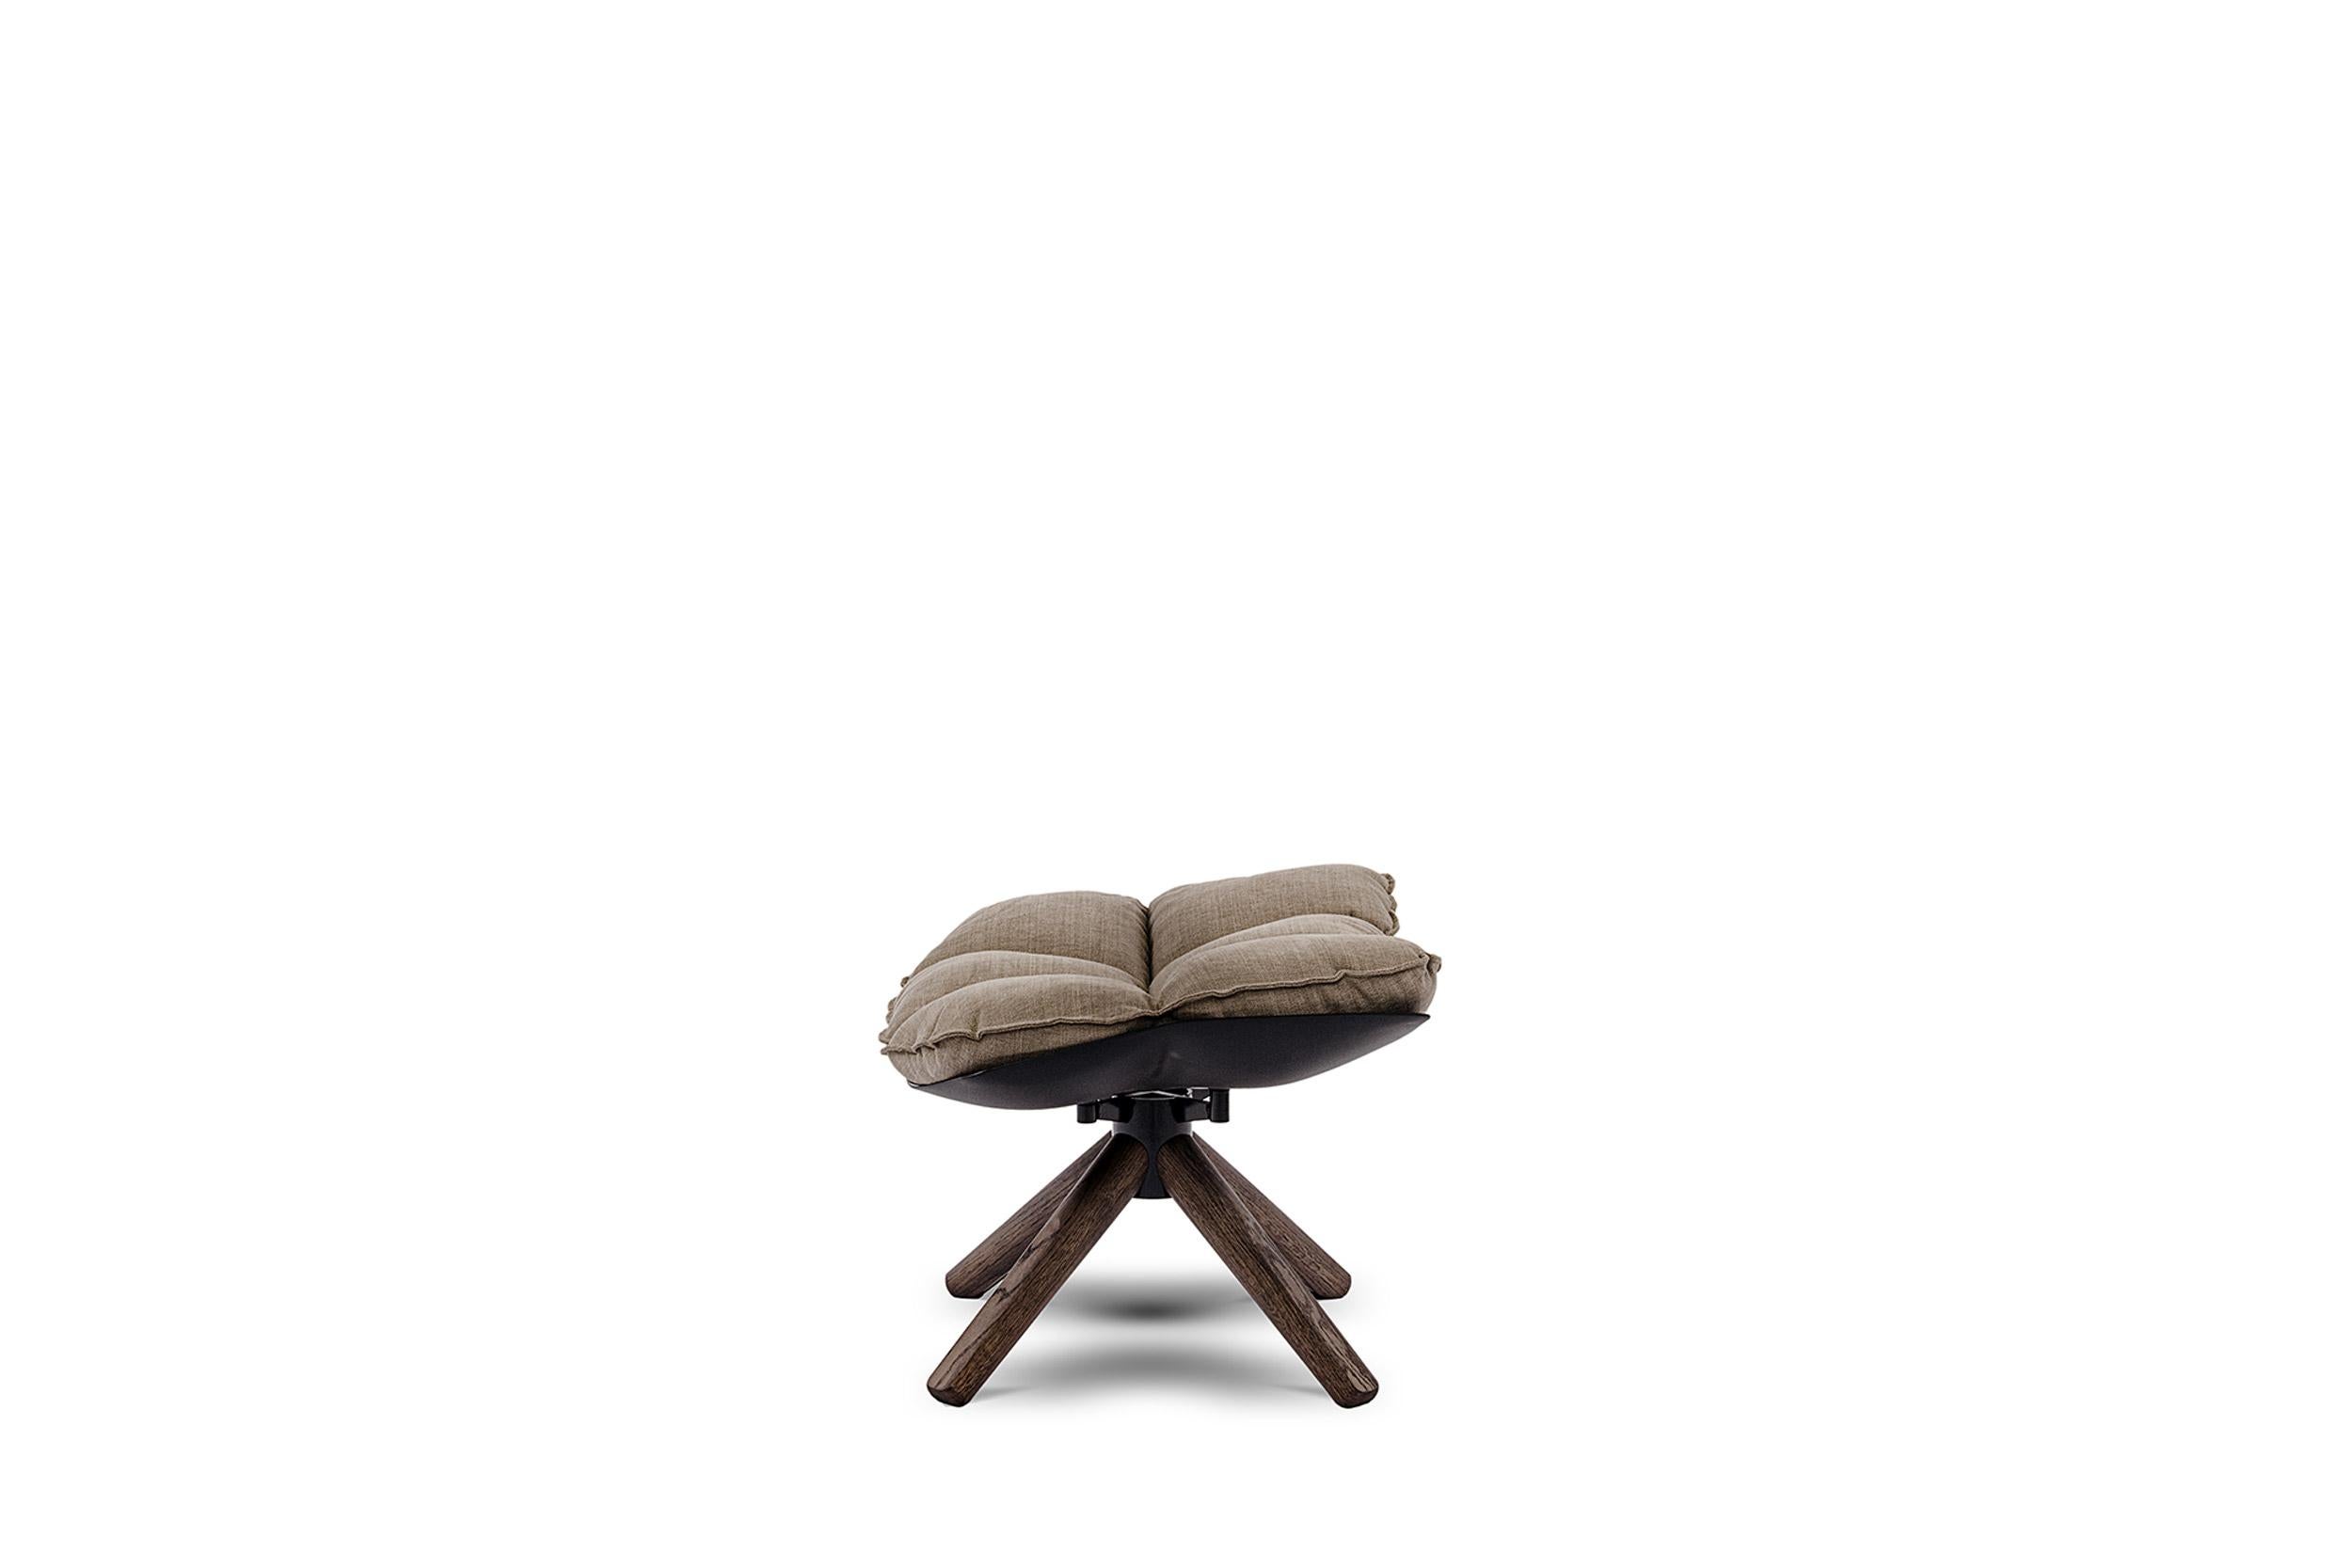 Contemporary Husk Armchair and Ottoman - Designed by Patricia Urquiola for B&B Italia